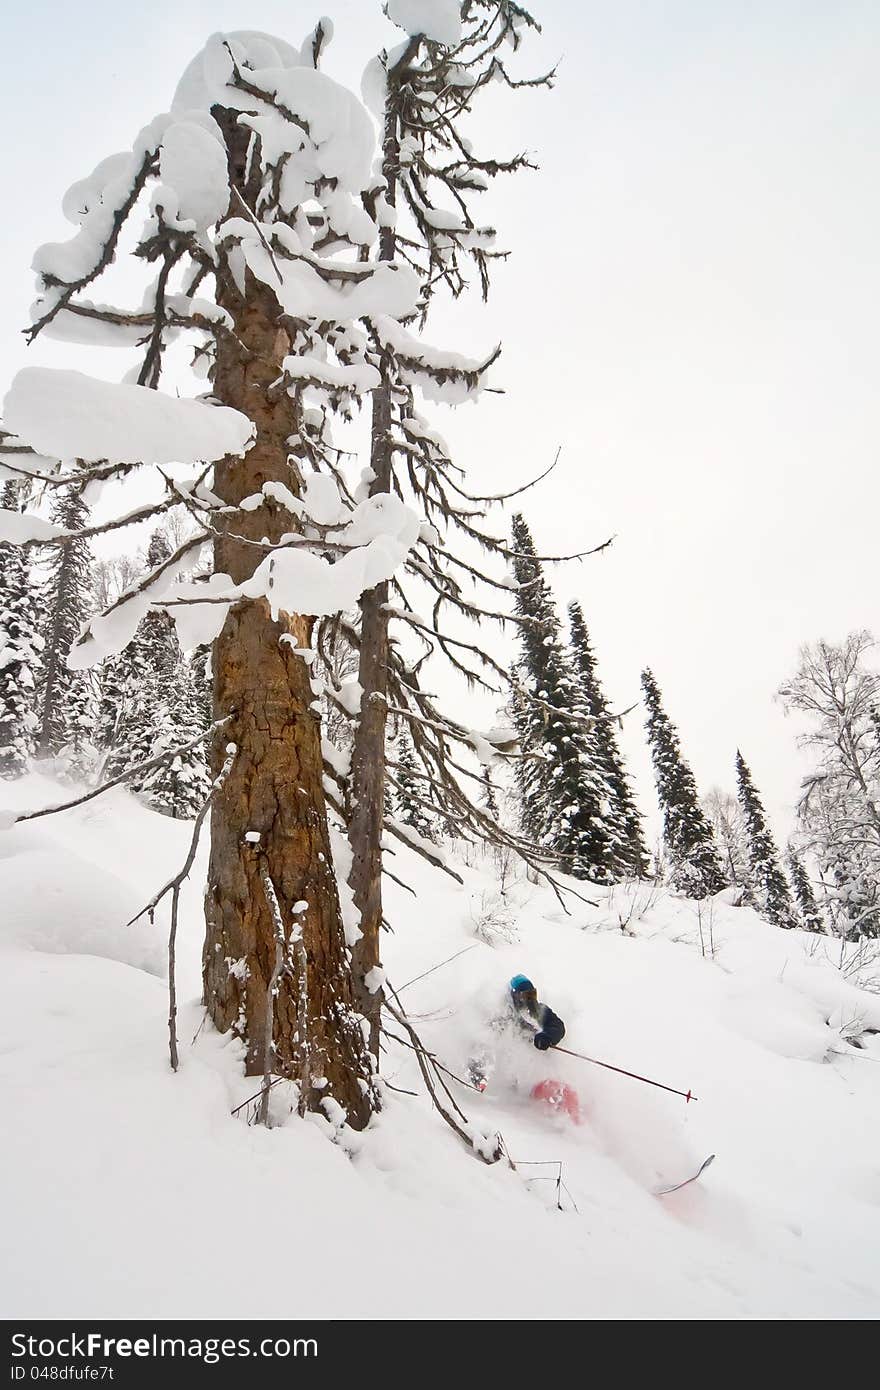 Freerider skiing in the mountains of Siberia. Freerider skiing in the mountains of Siberia